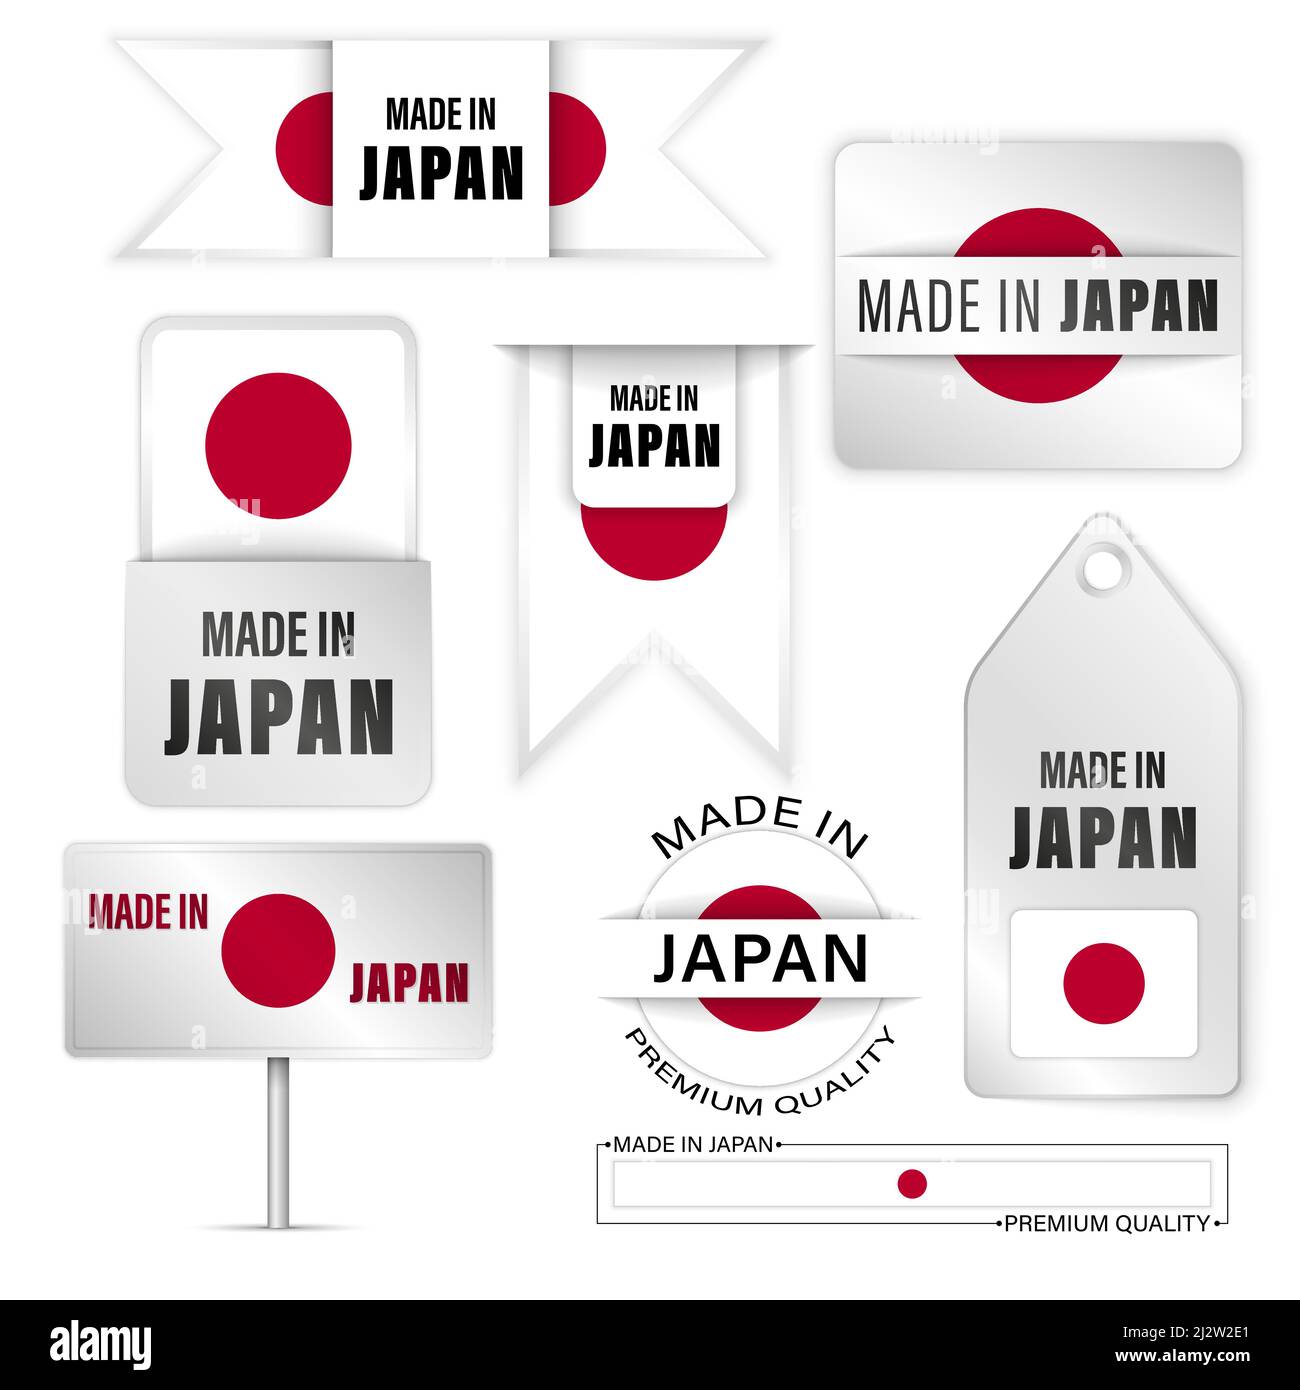 Made in Japan graphics and labels set. Some elements of impact for the use you want to make of it. Stock Vector